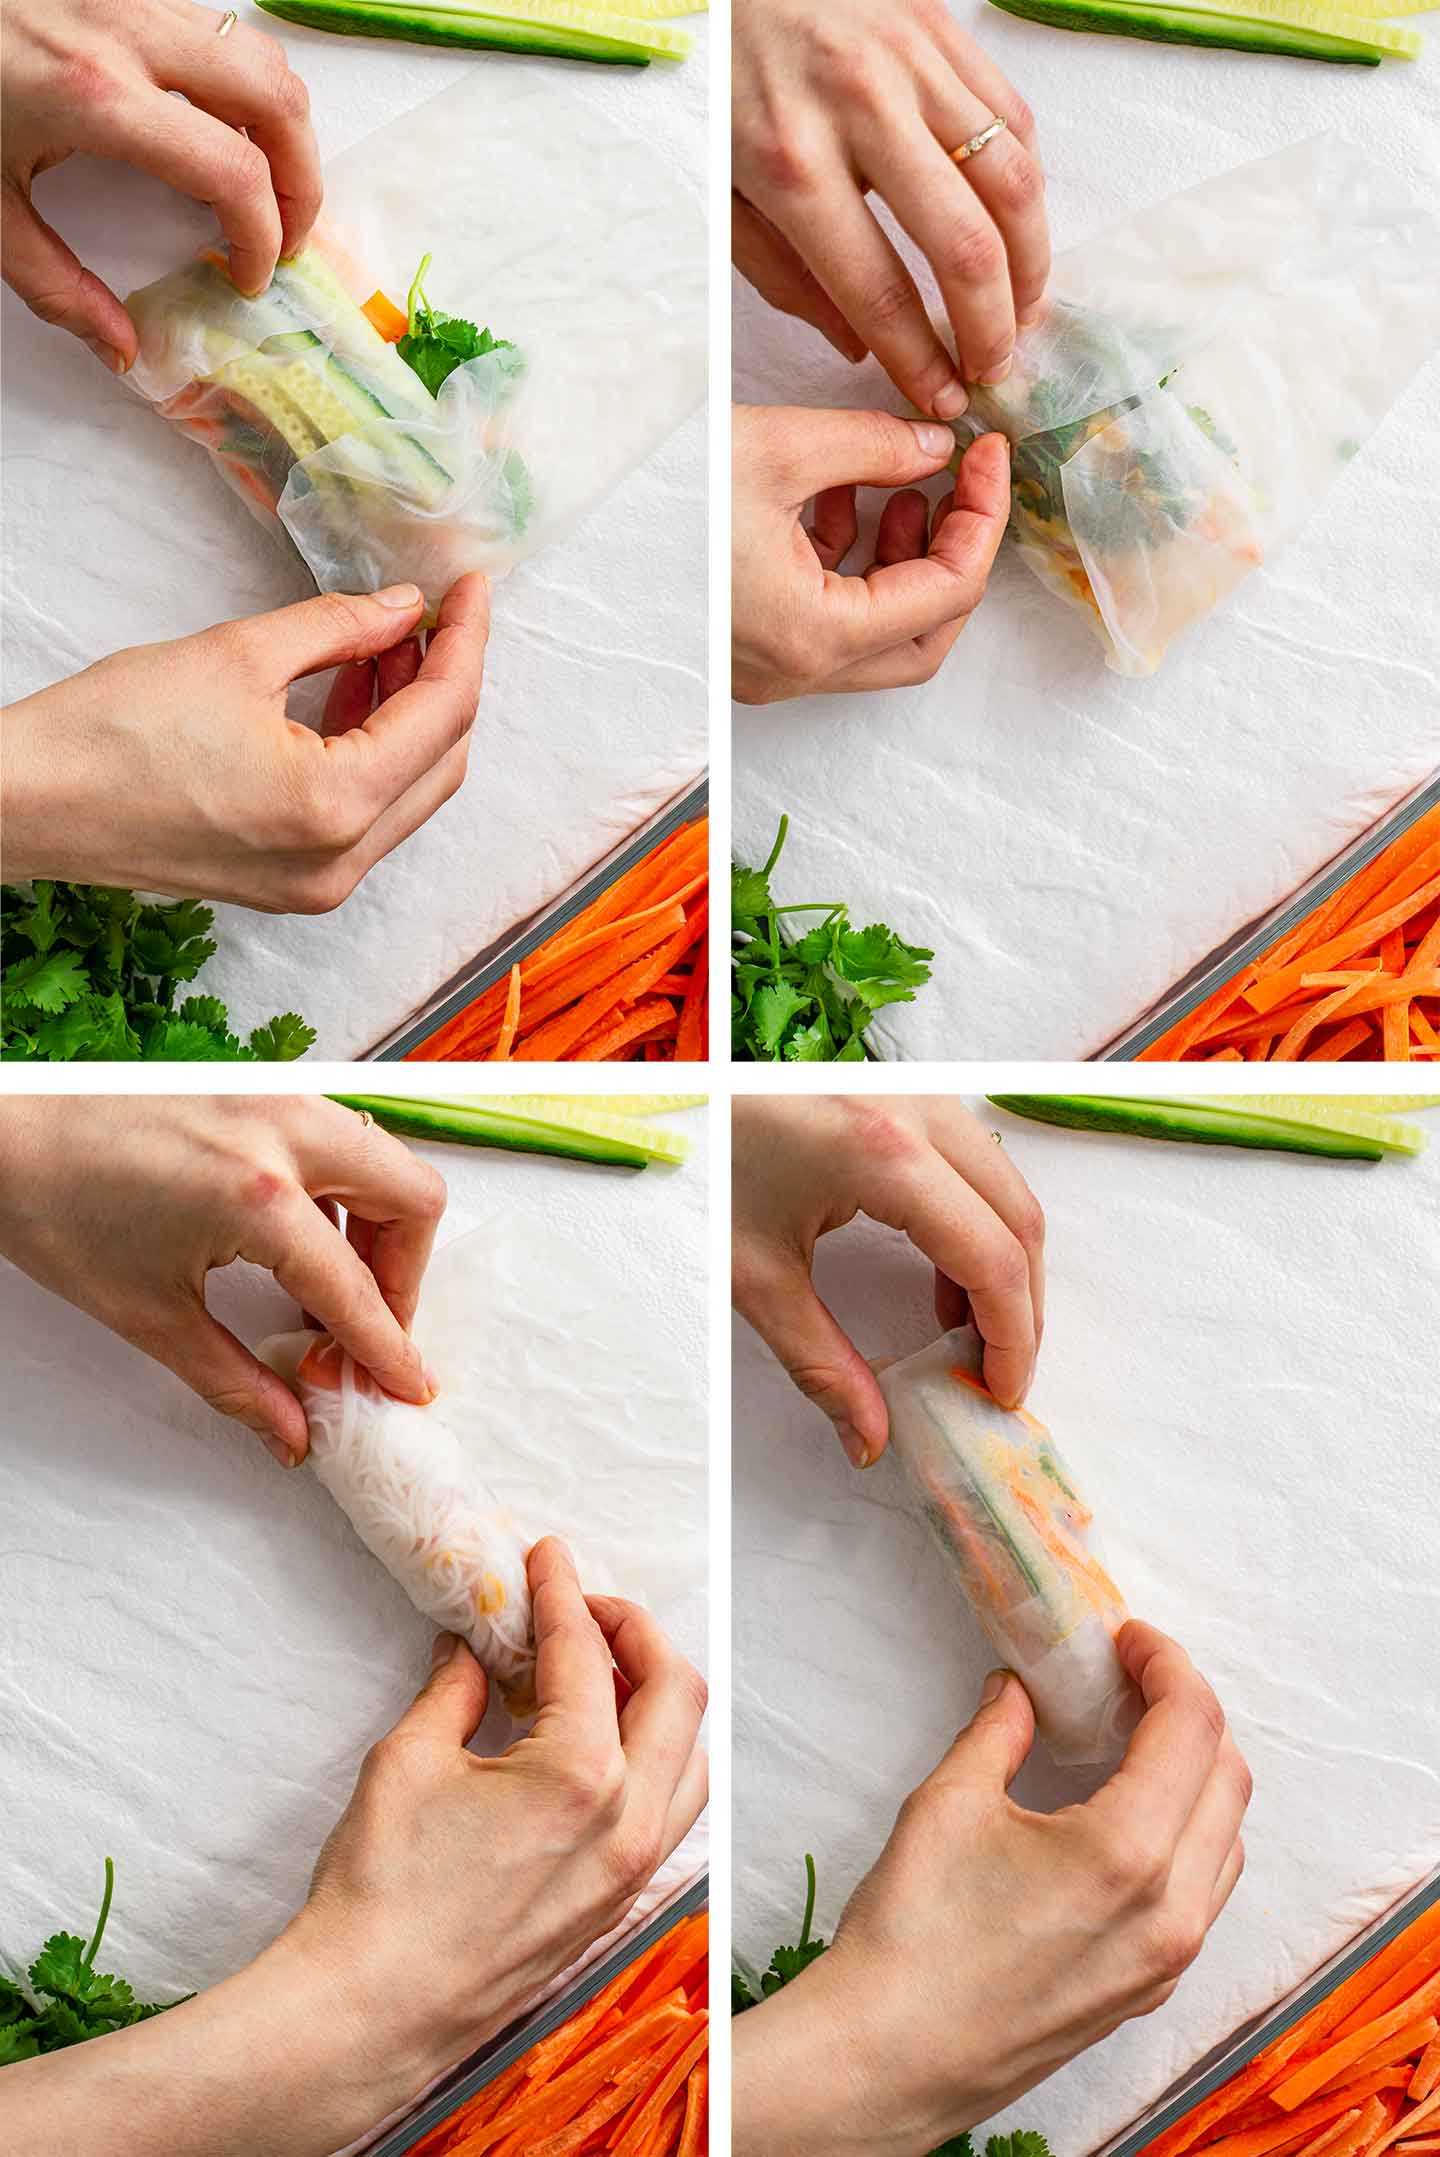 Top down grid of four process photos. Two hands fold rice wrapper over a bed of veggies and noodles placed in the centre. The hands fold the two side pieces in and over the fillings. Then the hands roll the rice wrapper in the direction of the first fold. A finished spring roll is the final photo.